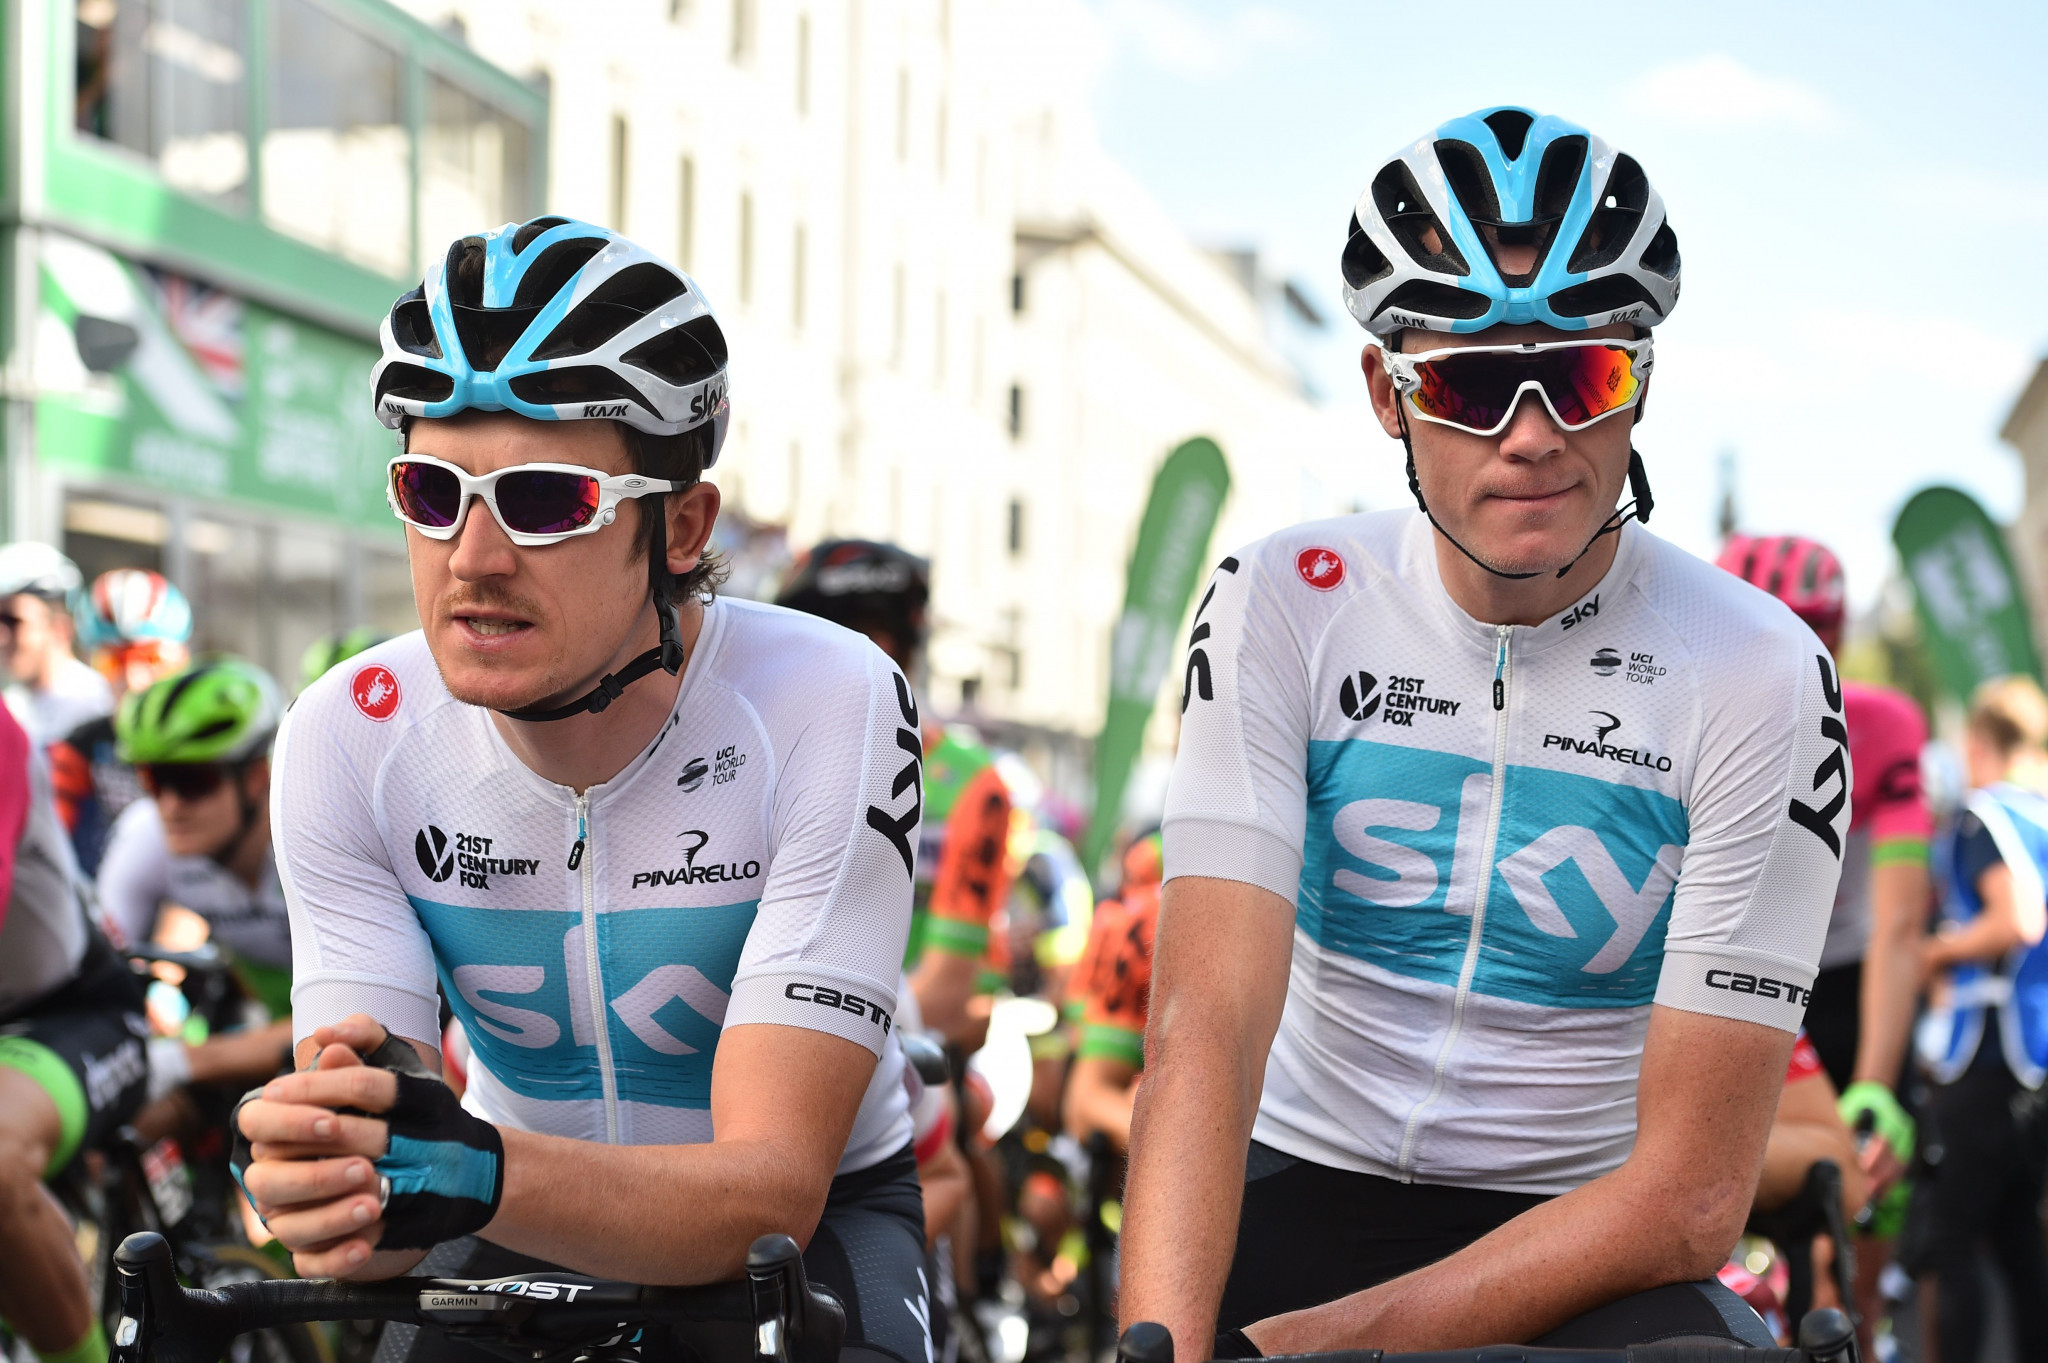 Britain's Geraint Thomas and Chris Froome are among the leading riders to sign the letter calling for the election to be postponed ©Getty Images